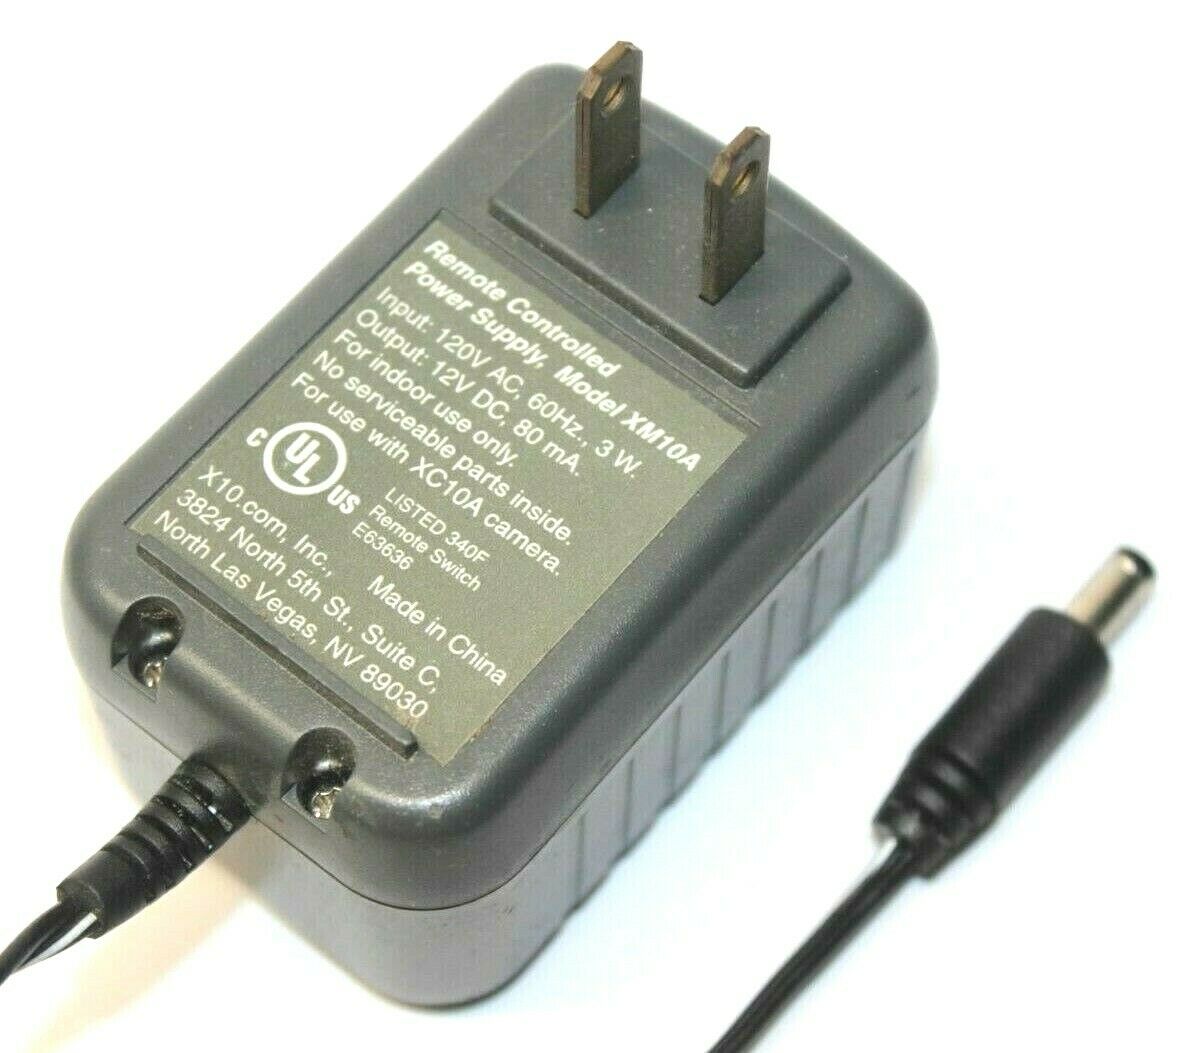 Remote Controlled Power Supply XM10A AC Adapter Output DC 12V 80mA for Camera Brand: Remote Controlled X10 Type: Ada